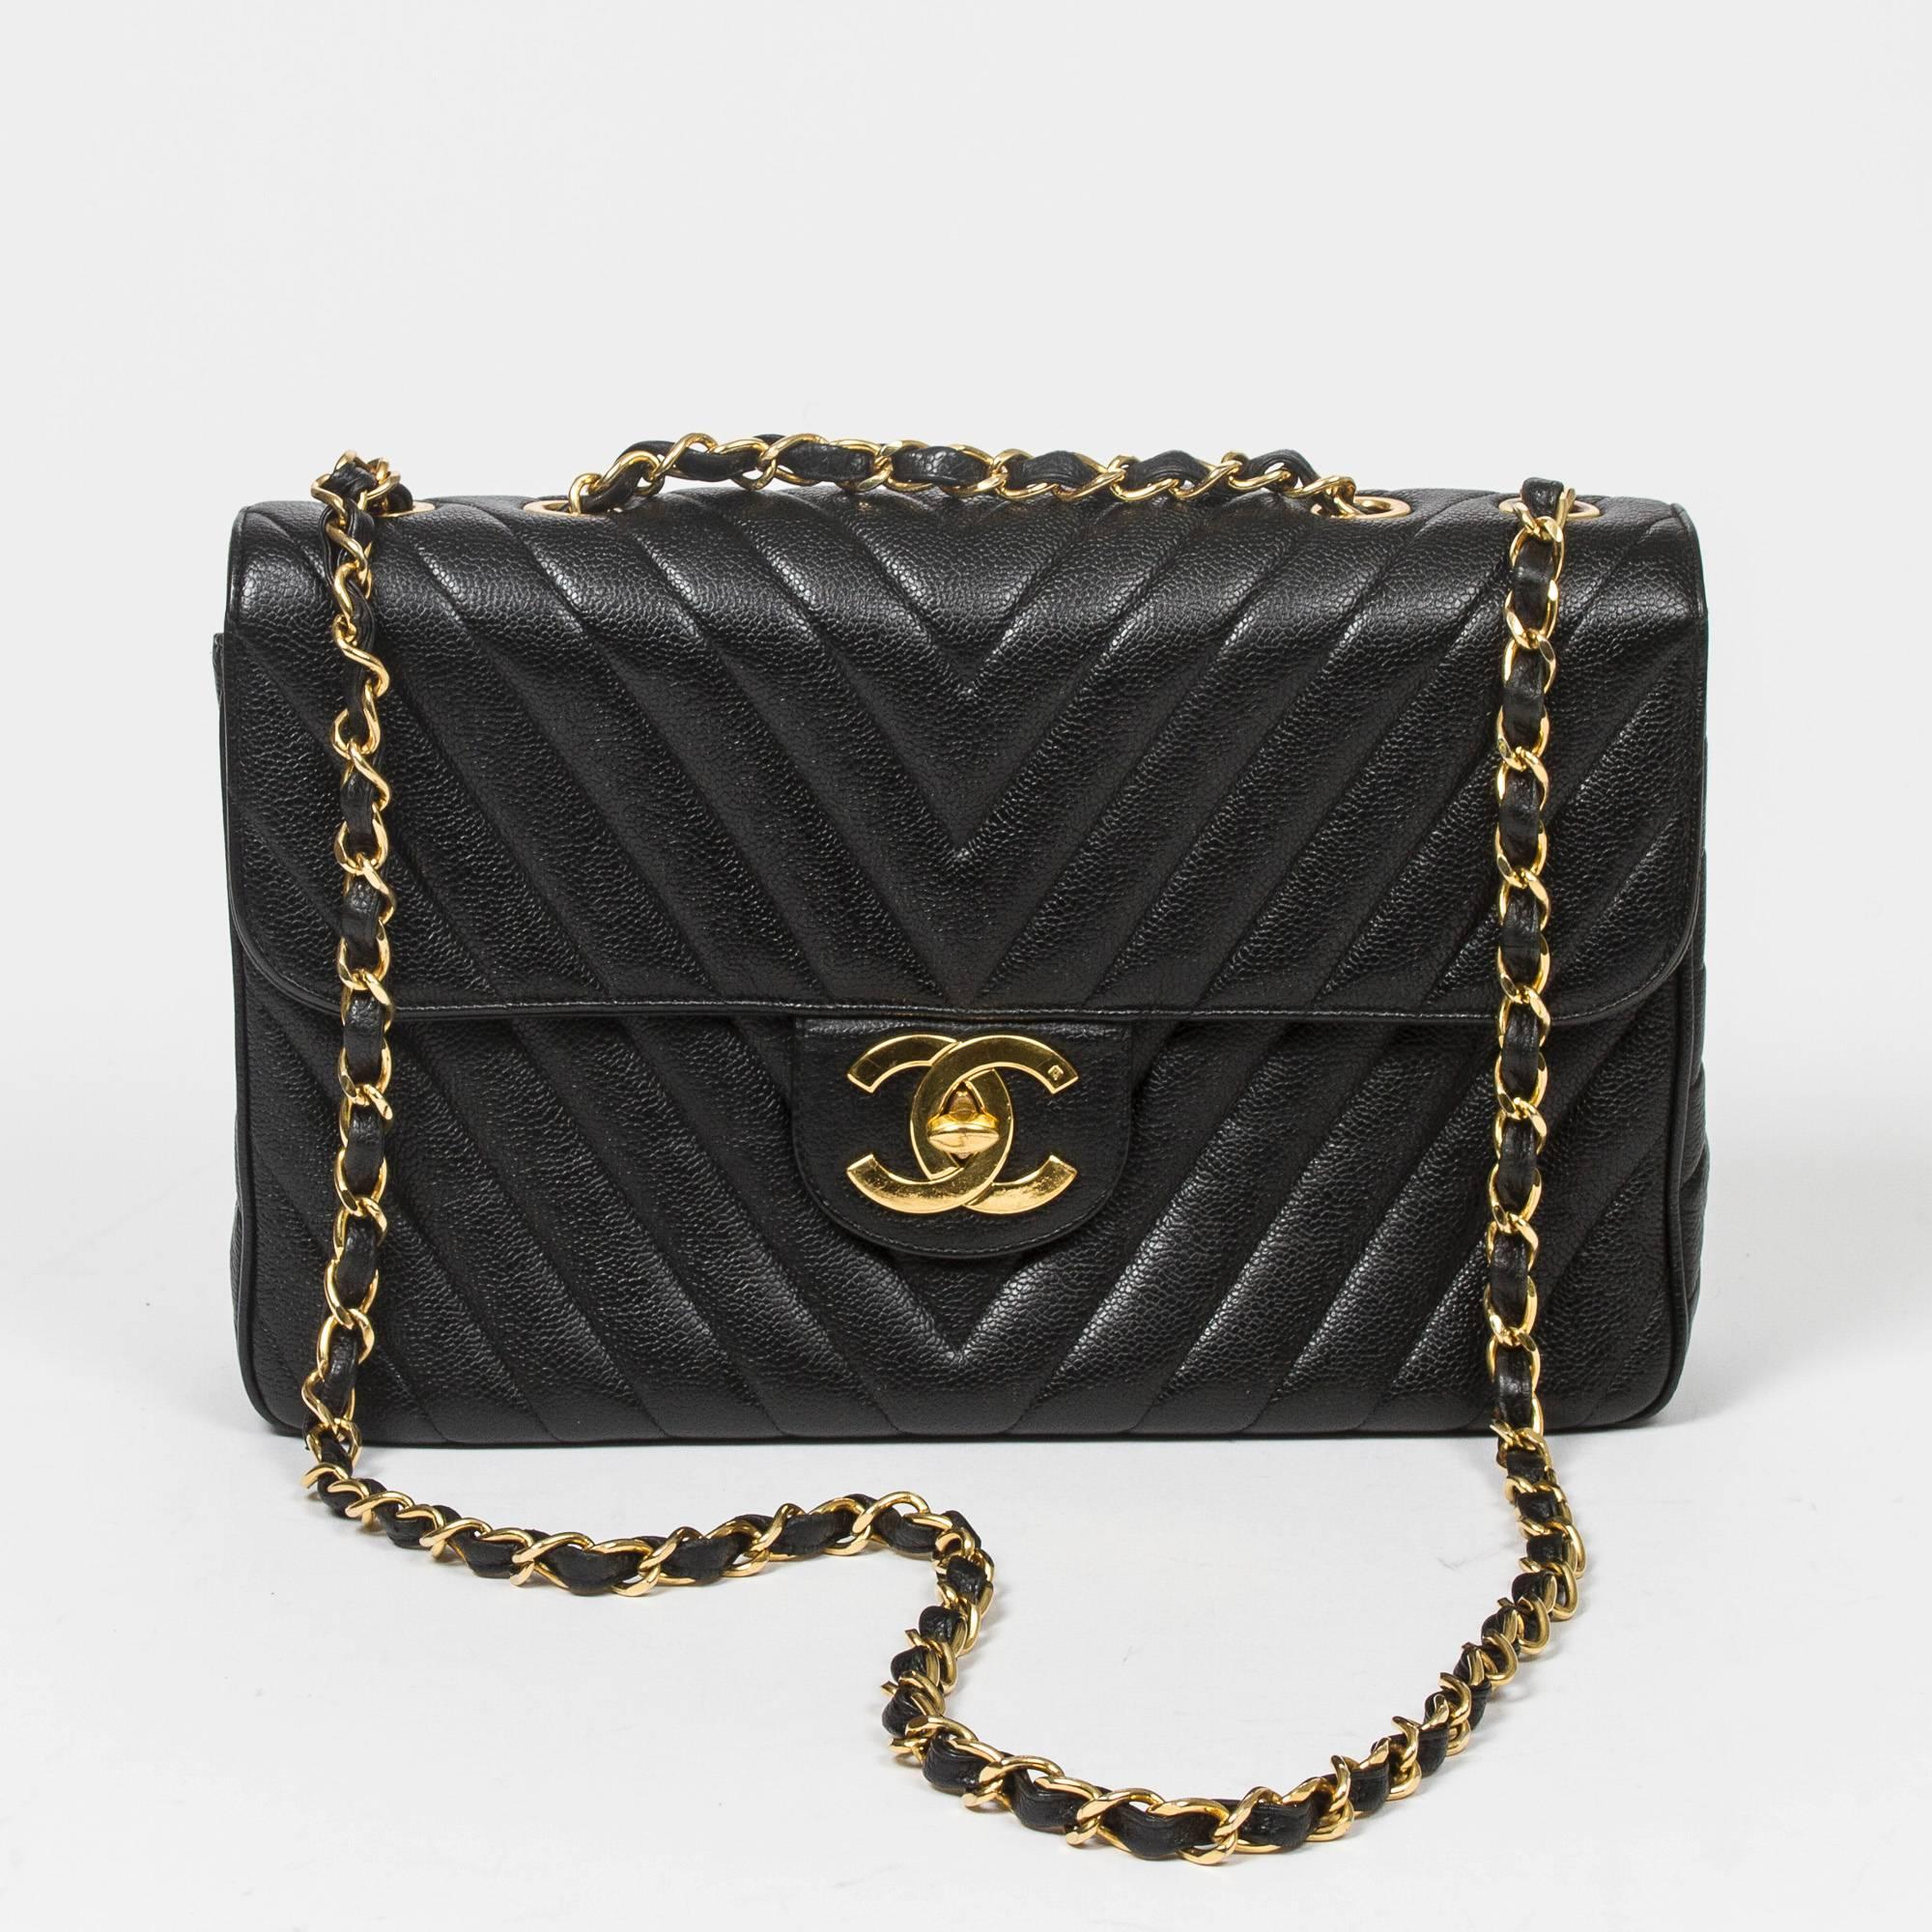 Chanel - Jumbo Maxi Chevron Quilted Caviar Leather 2